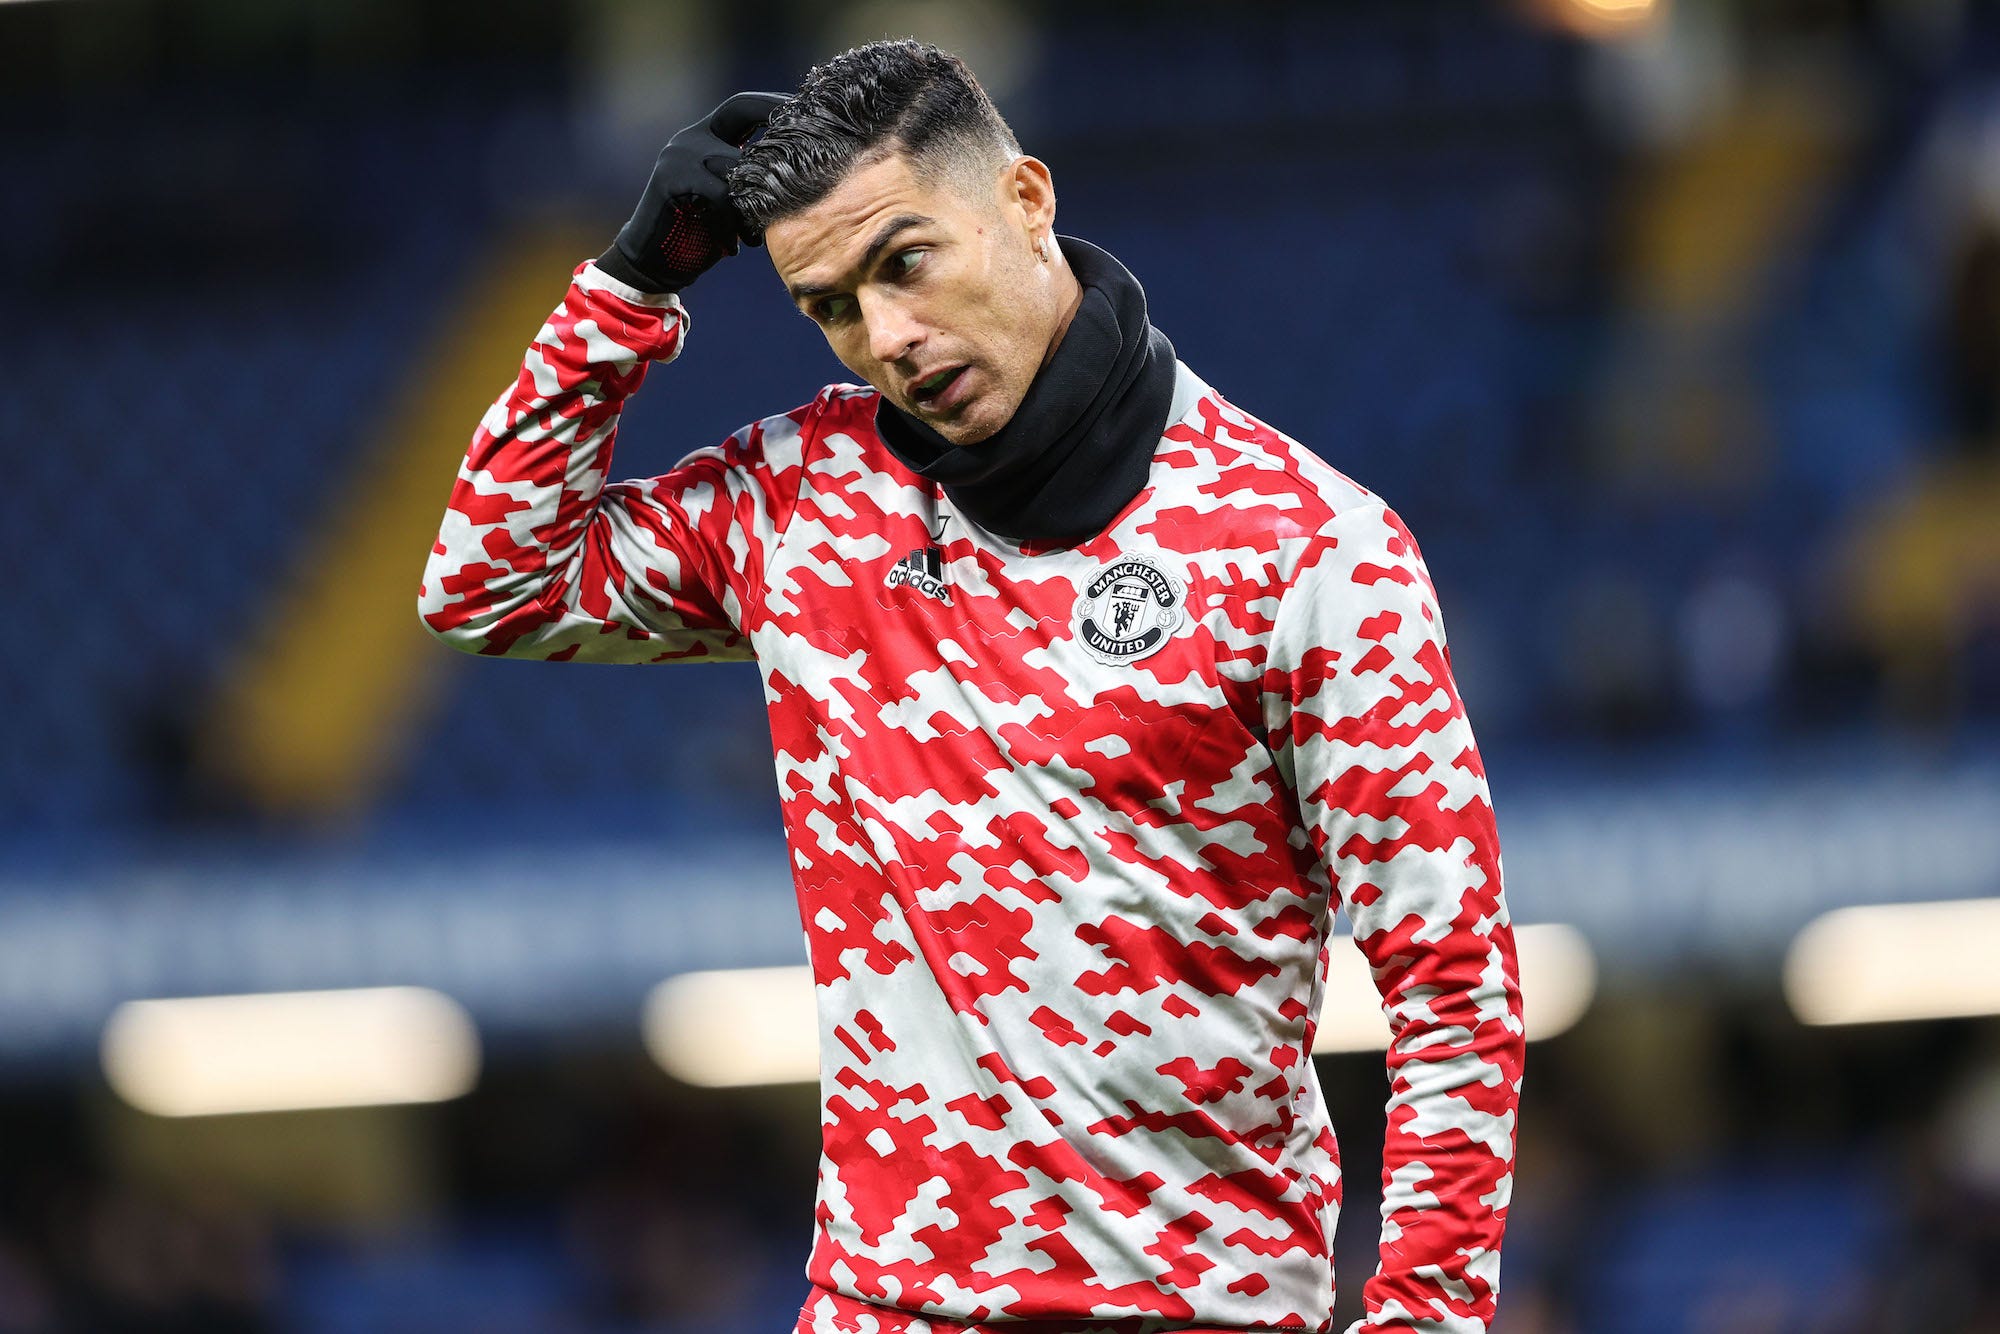 Cristiano Ronaldo of Man Utd scotches his head ahead of the Premier League match between Chelsea and Manchester United at Stamford Bridge